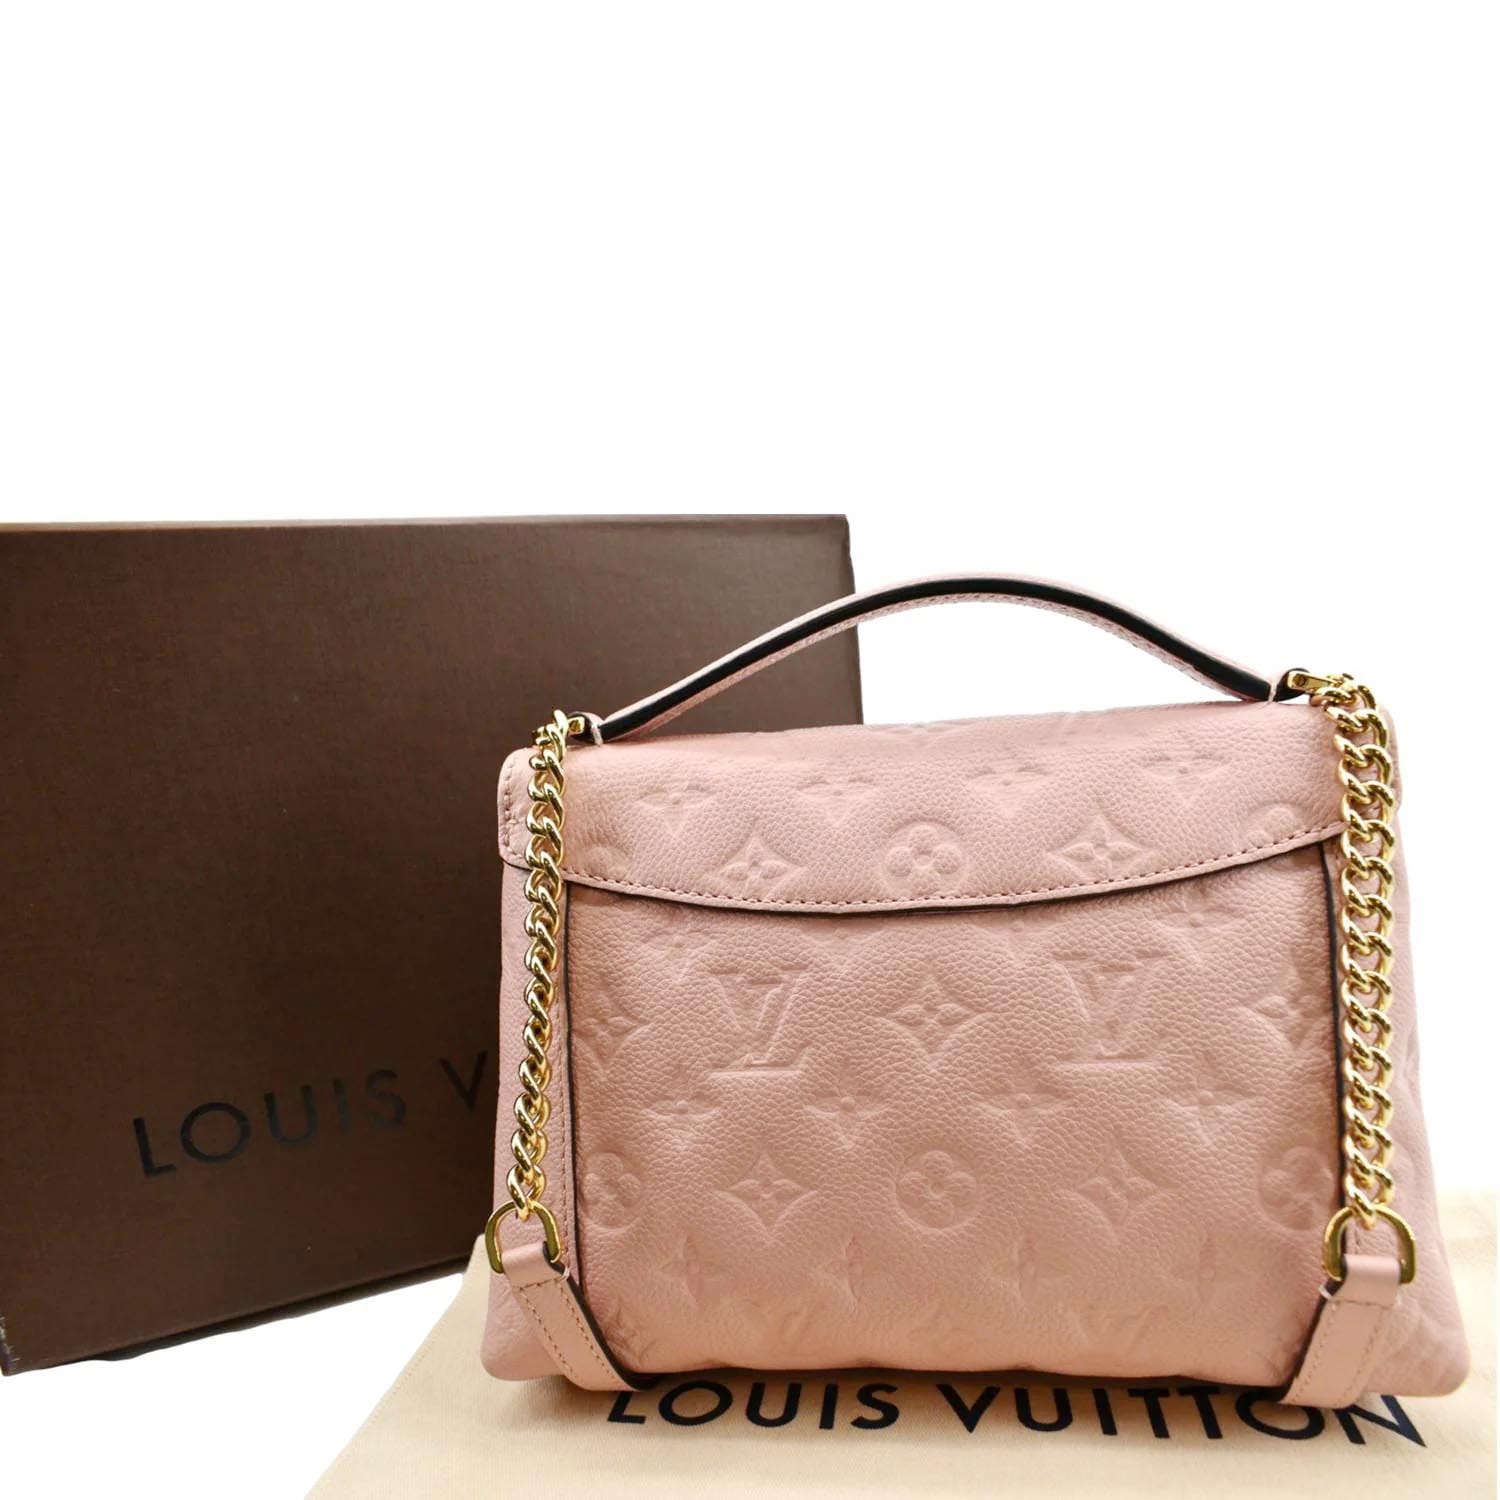 BLANCHE BB Louis Vuitton! UNDERRATED BAG THAT YOU SHOULD GET!! 